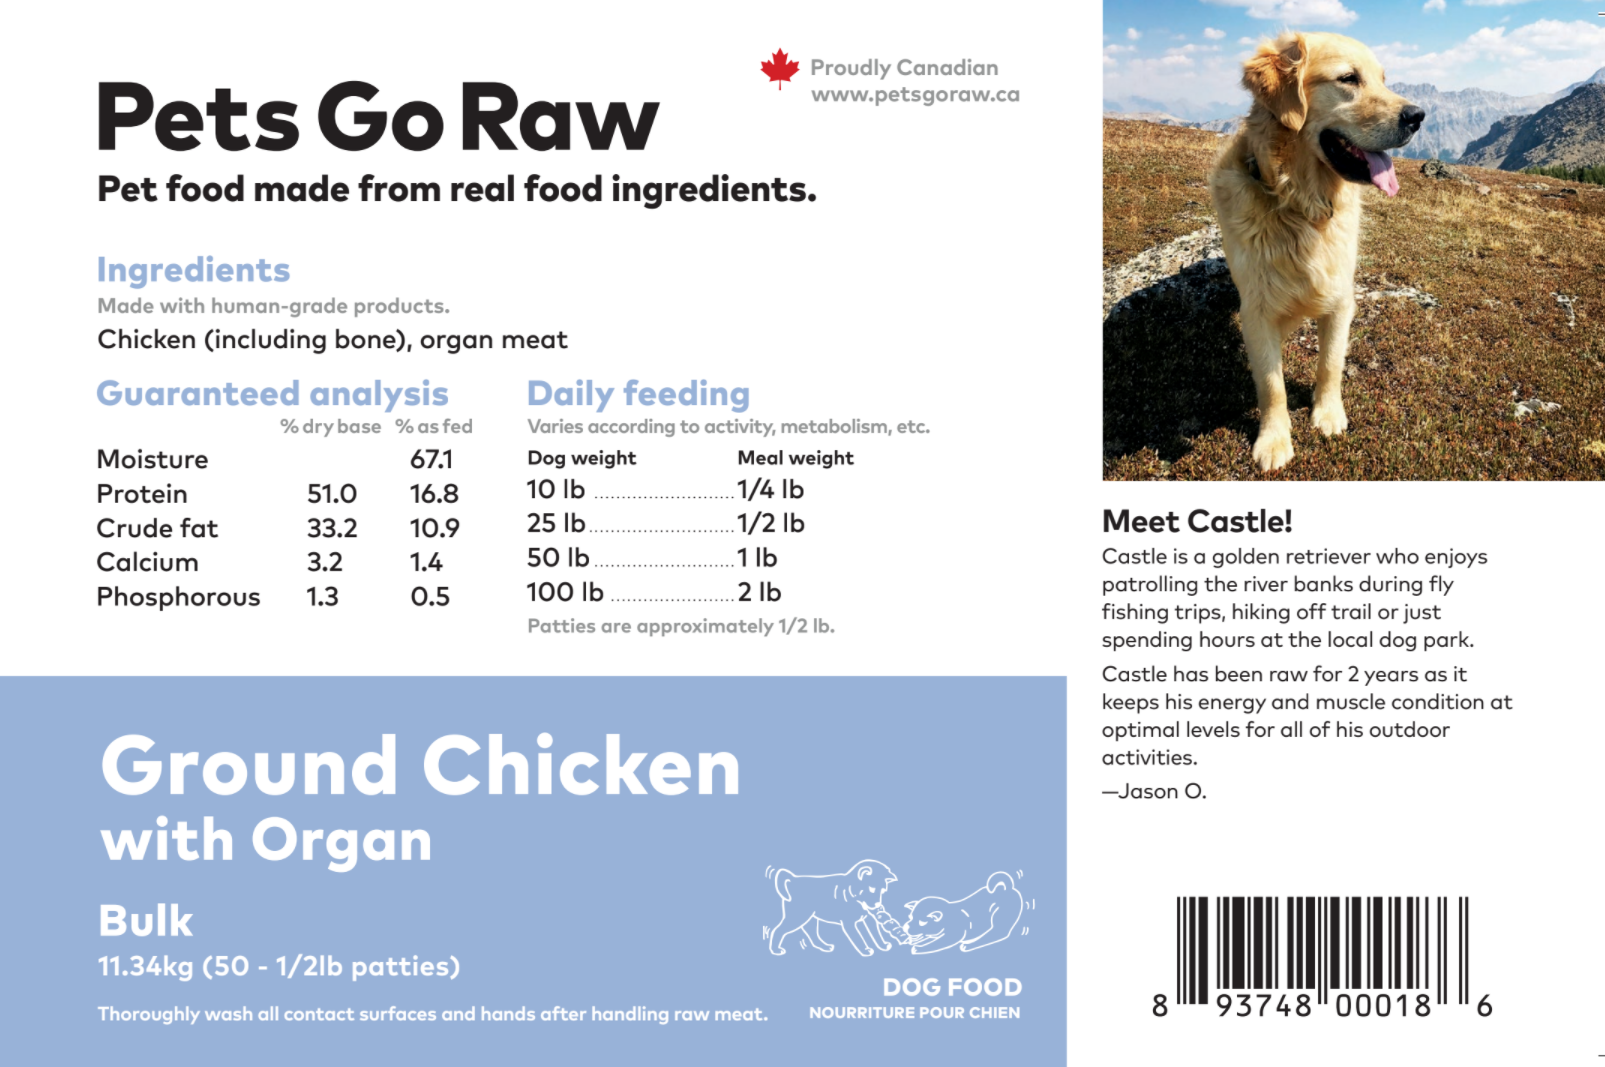 where can i buy organ meat for dogs